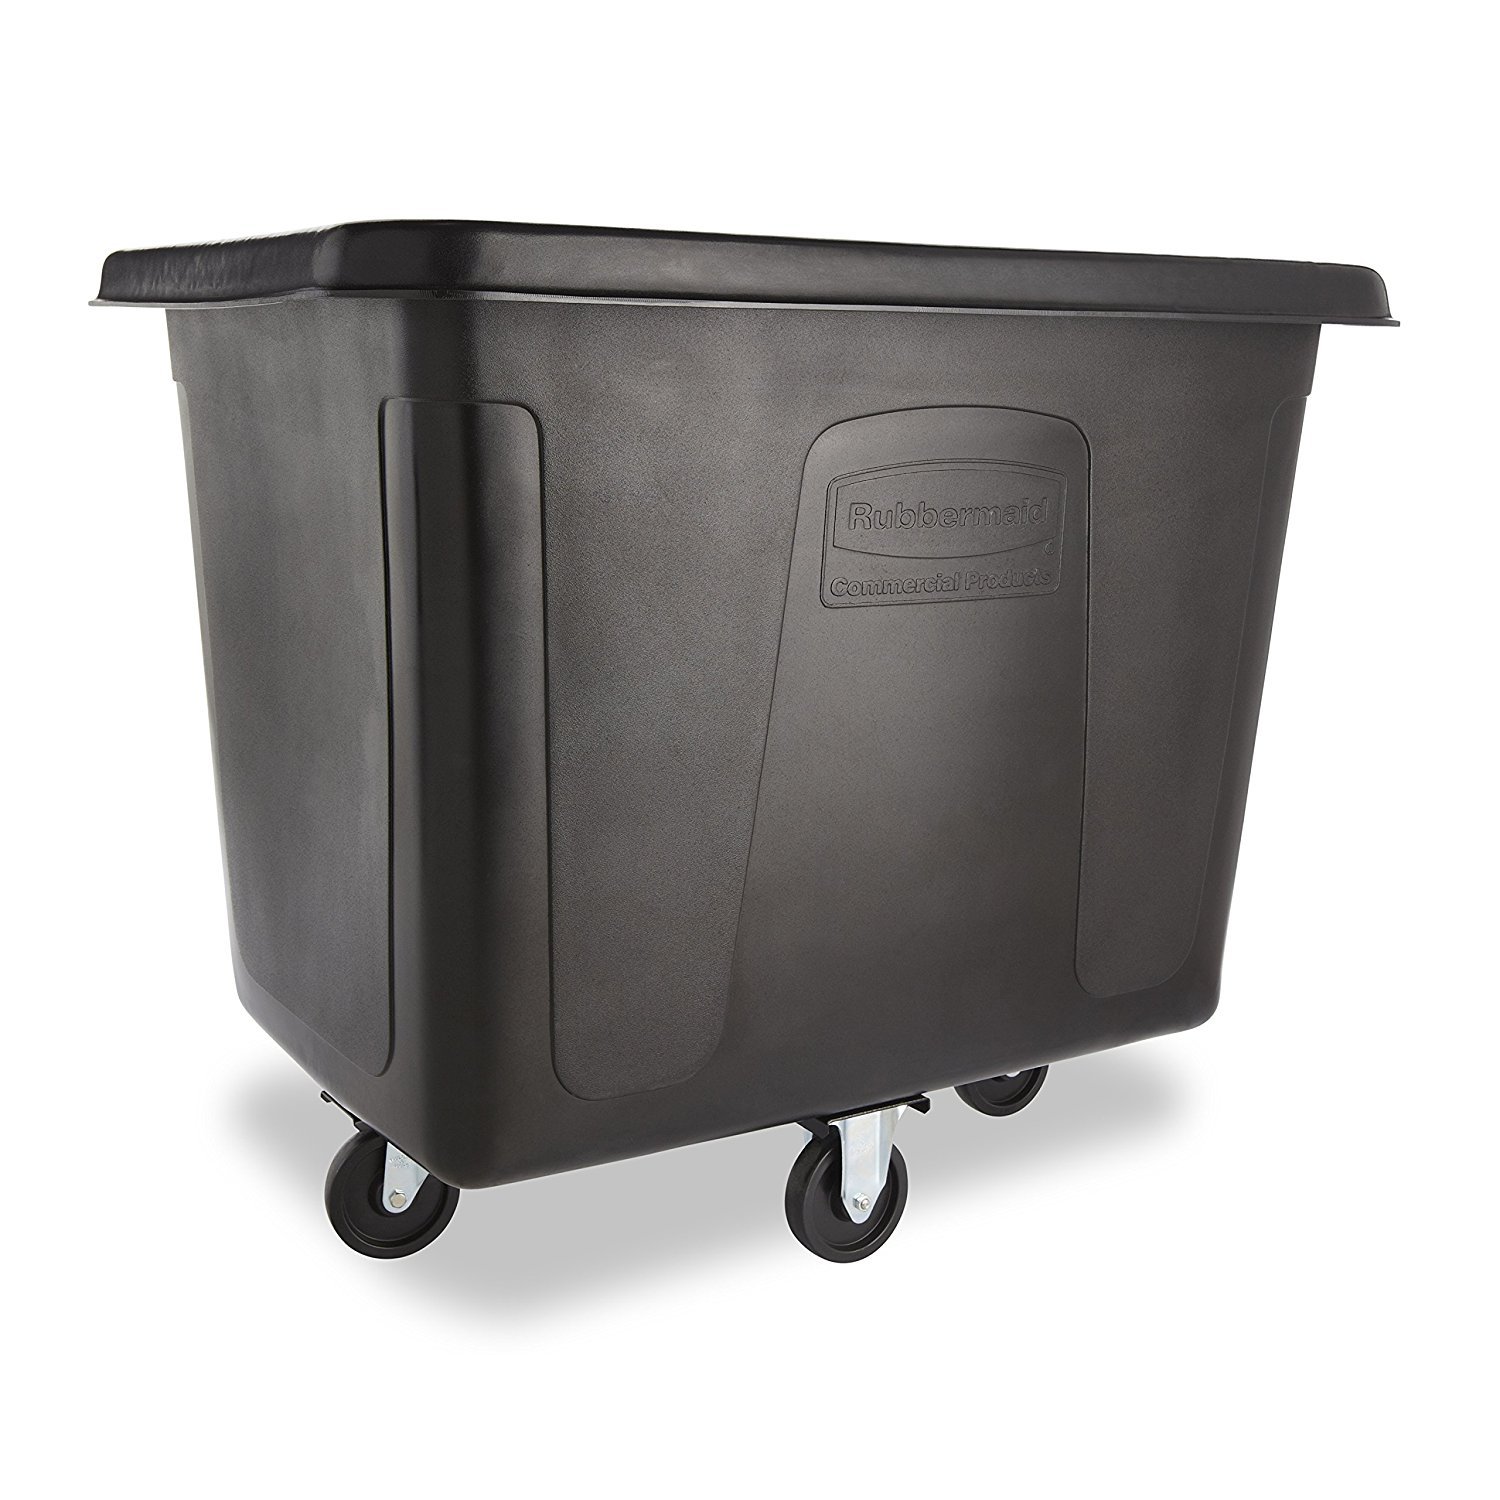 Rubbermaid Commercial MDPE 102.9-Gallon Laundry and Waste Collection Cube Truck